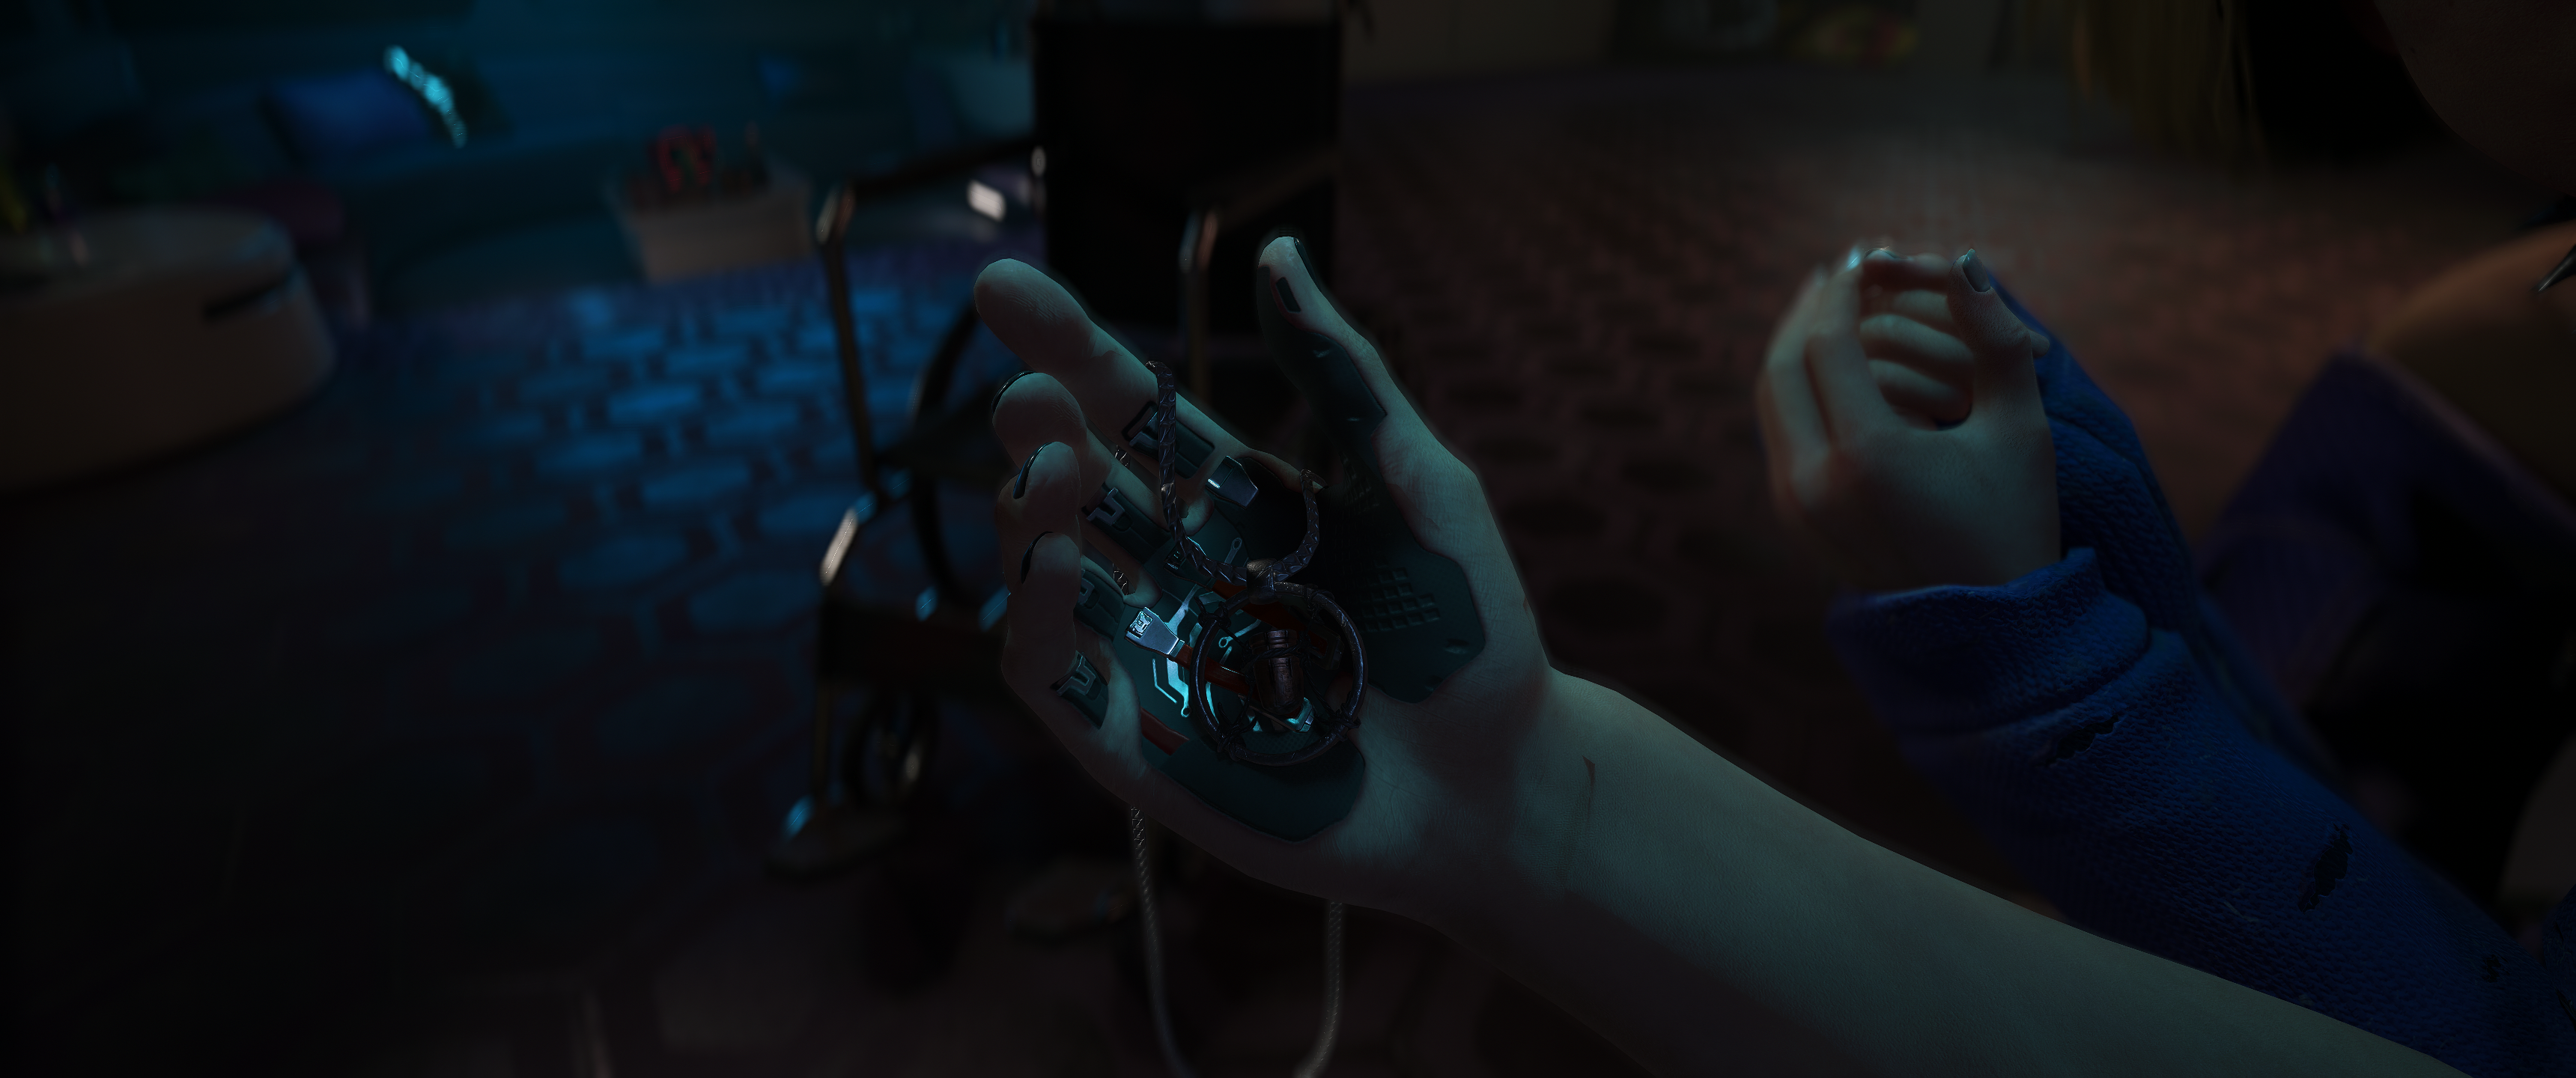 Cyberpunk 2077 CD Projekt RED Necklace Game Photography CGi Video Game Art Hands Depth Of Field Vide 3440x1440